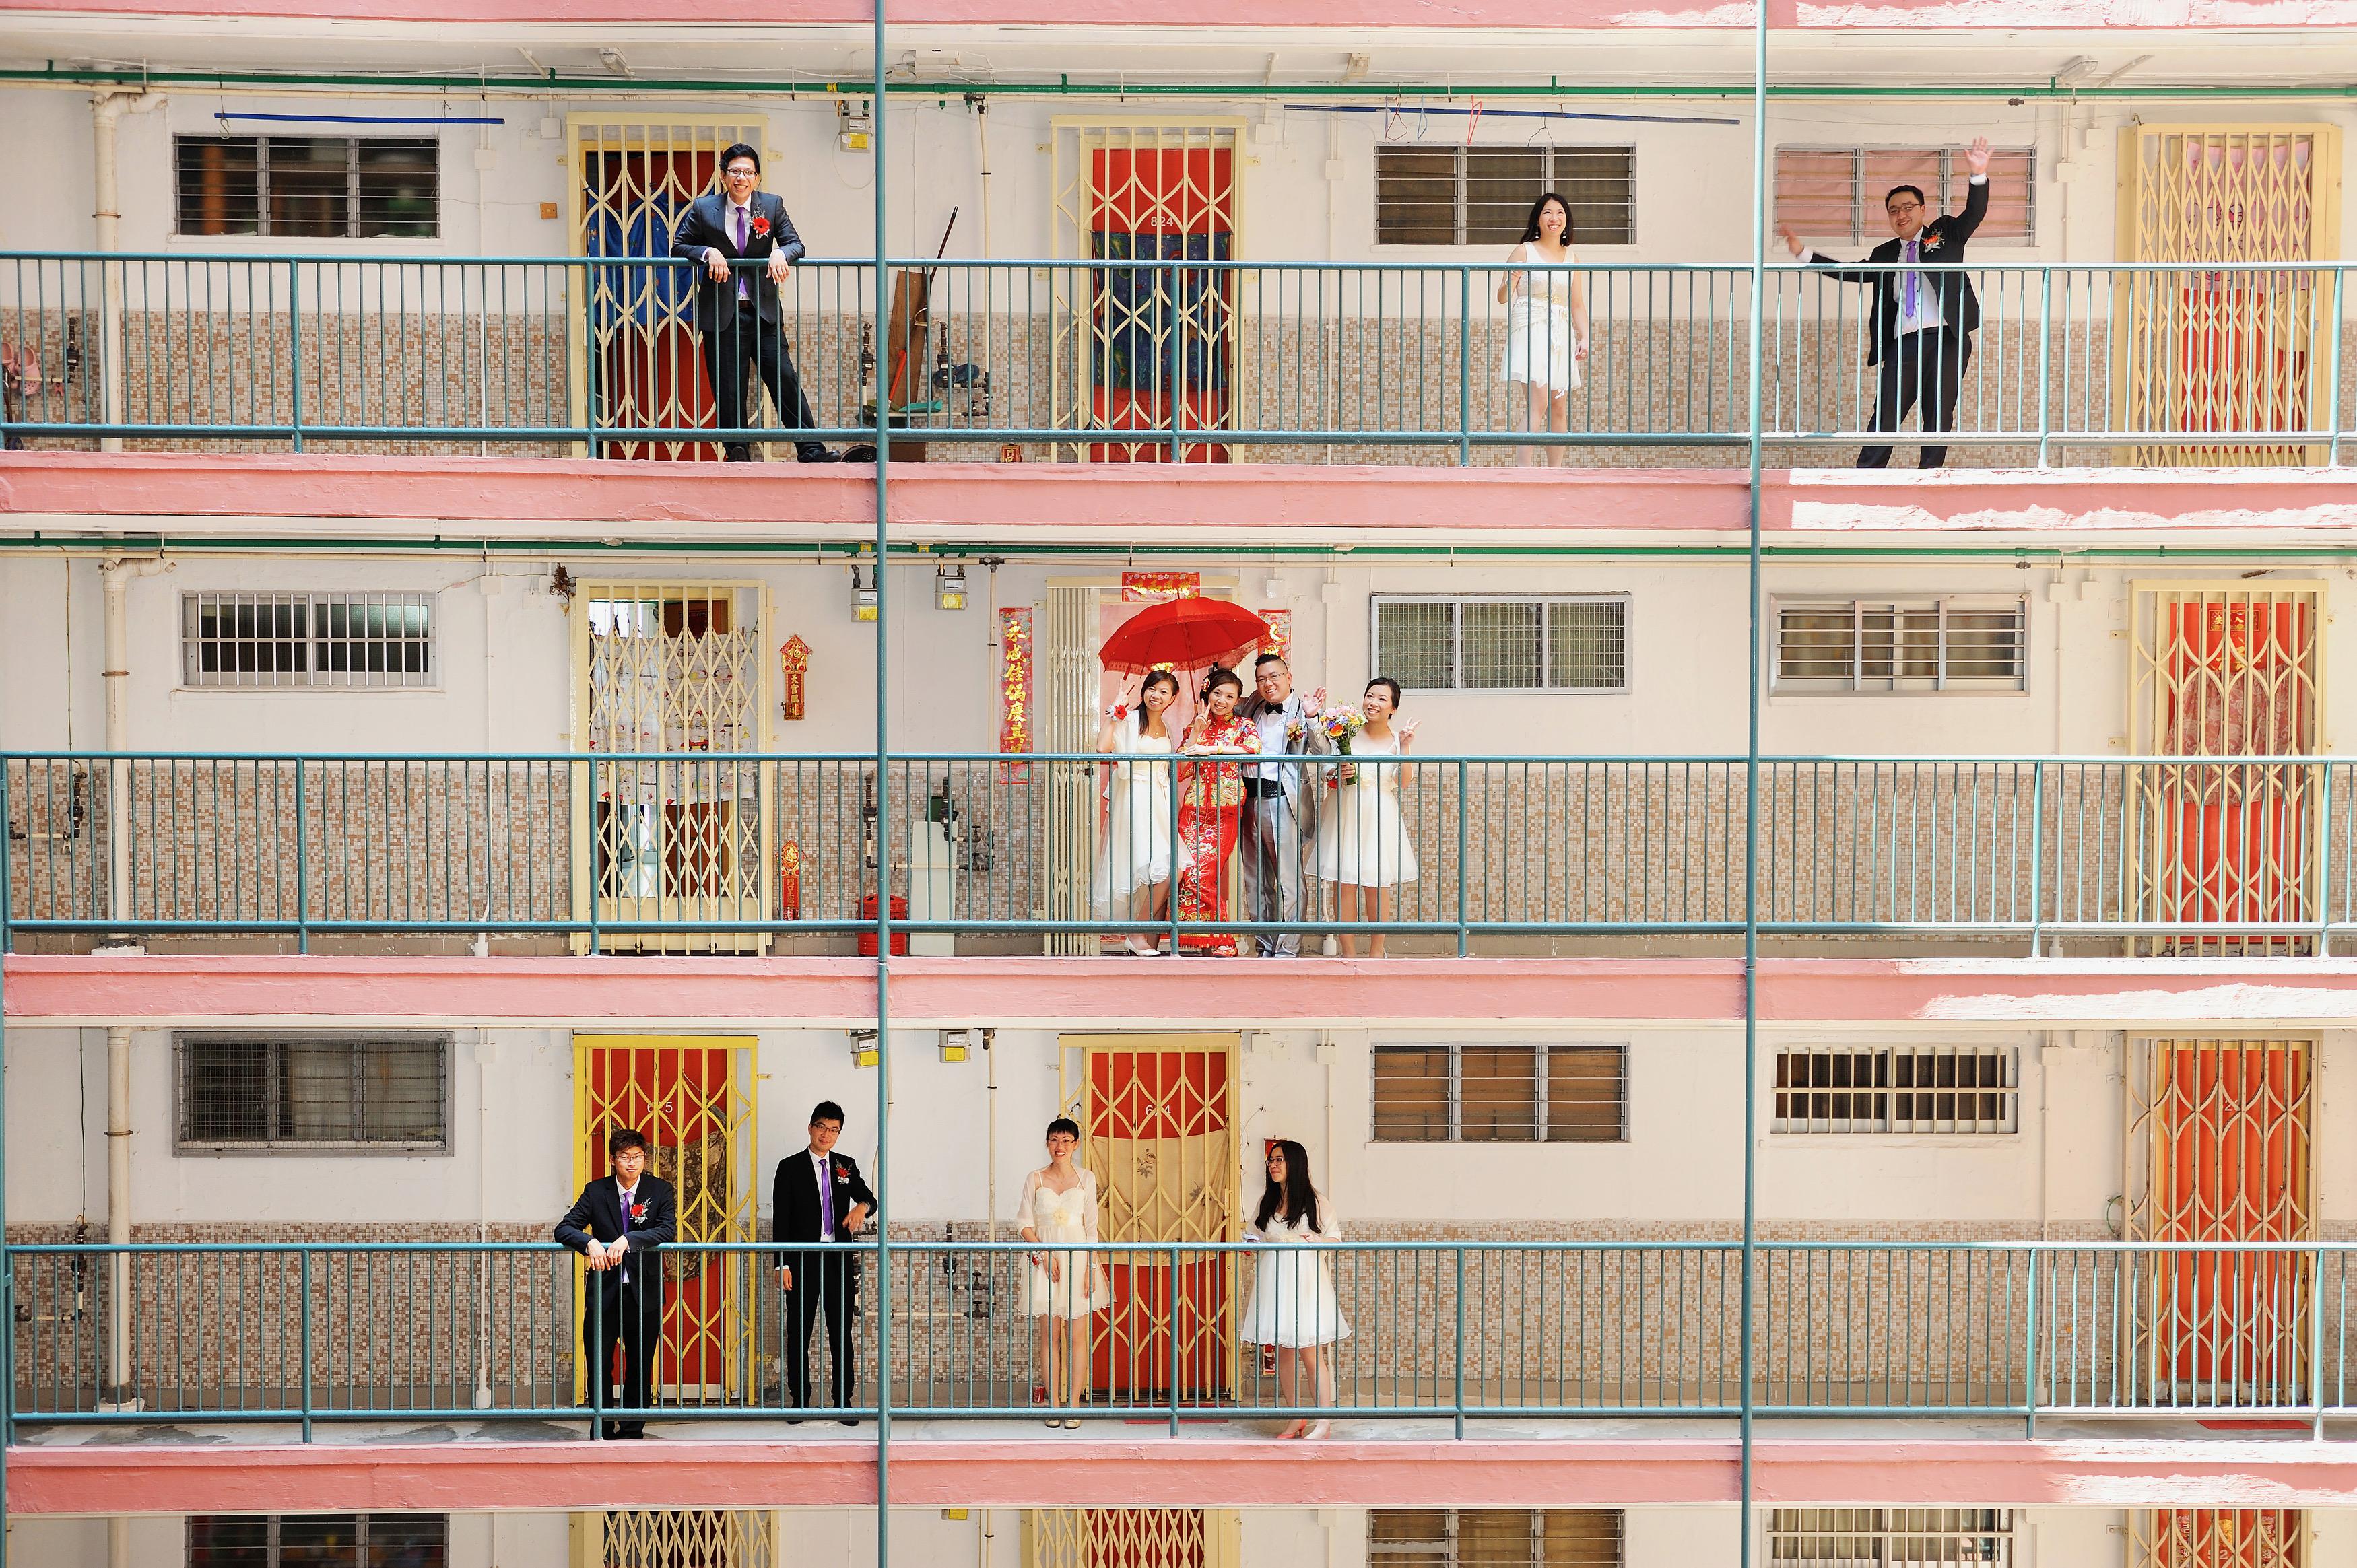 The winning entries of the Hong Kong Housing Authority's 50th Anniversary Photo Contest are on display at the atrium of Domain shopping mall in Yau Tong from today (December 14) until January 19, 2024. Photo shows the champion photo "A Day of Great Happiness" of the "Resident Group" category.